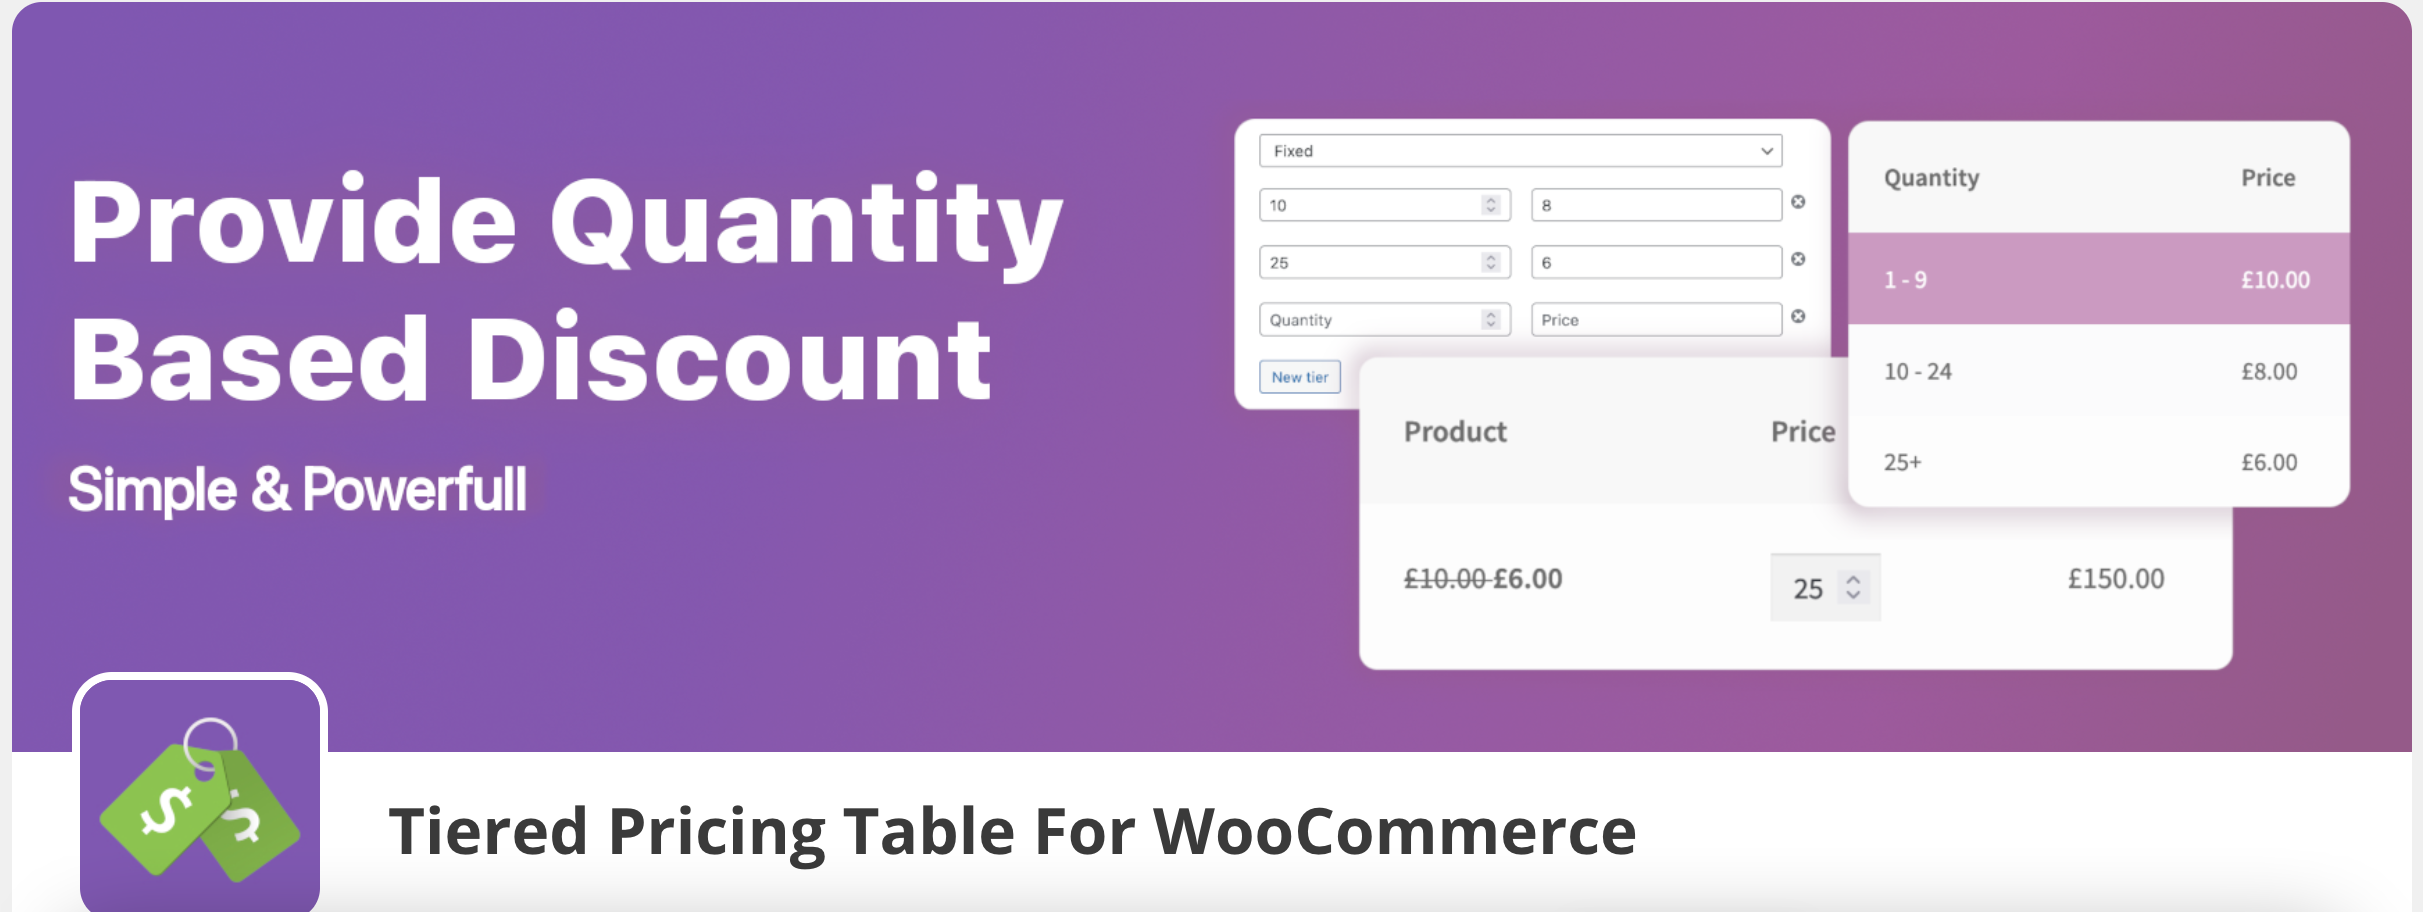 Tiered Pricing for WooCommerce